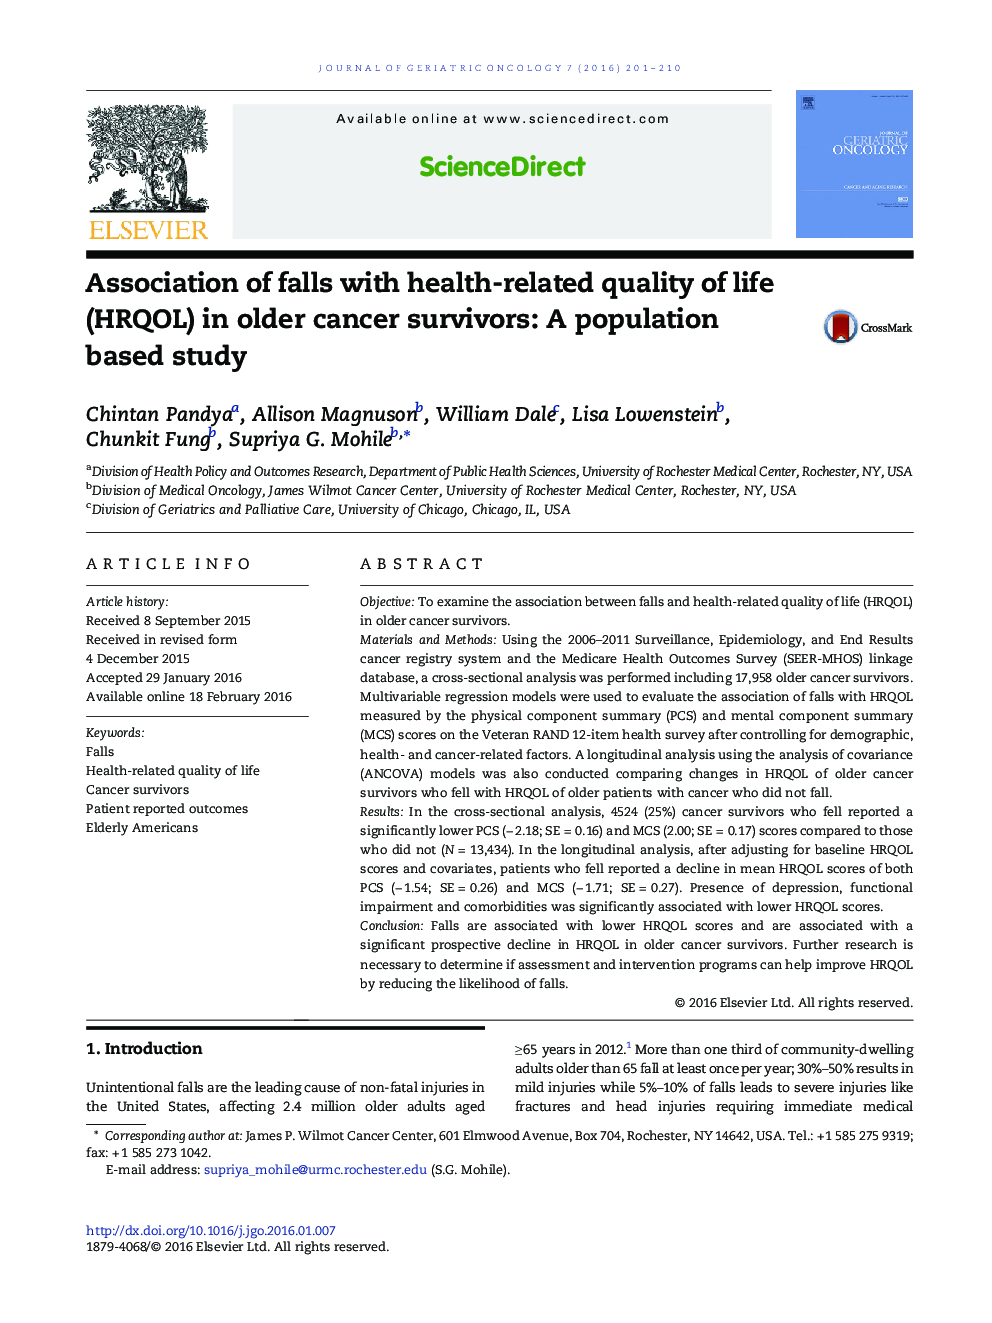 Association of falls with health-related quality of life (HRQOL) in older cancer survivors: A population based study